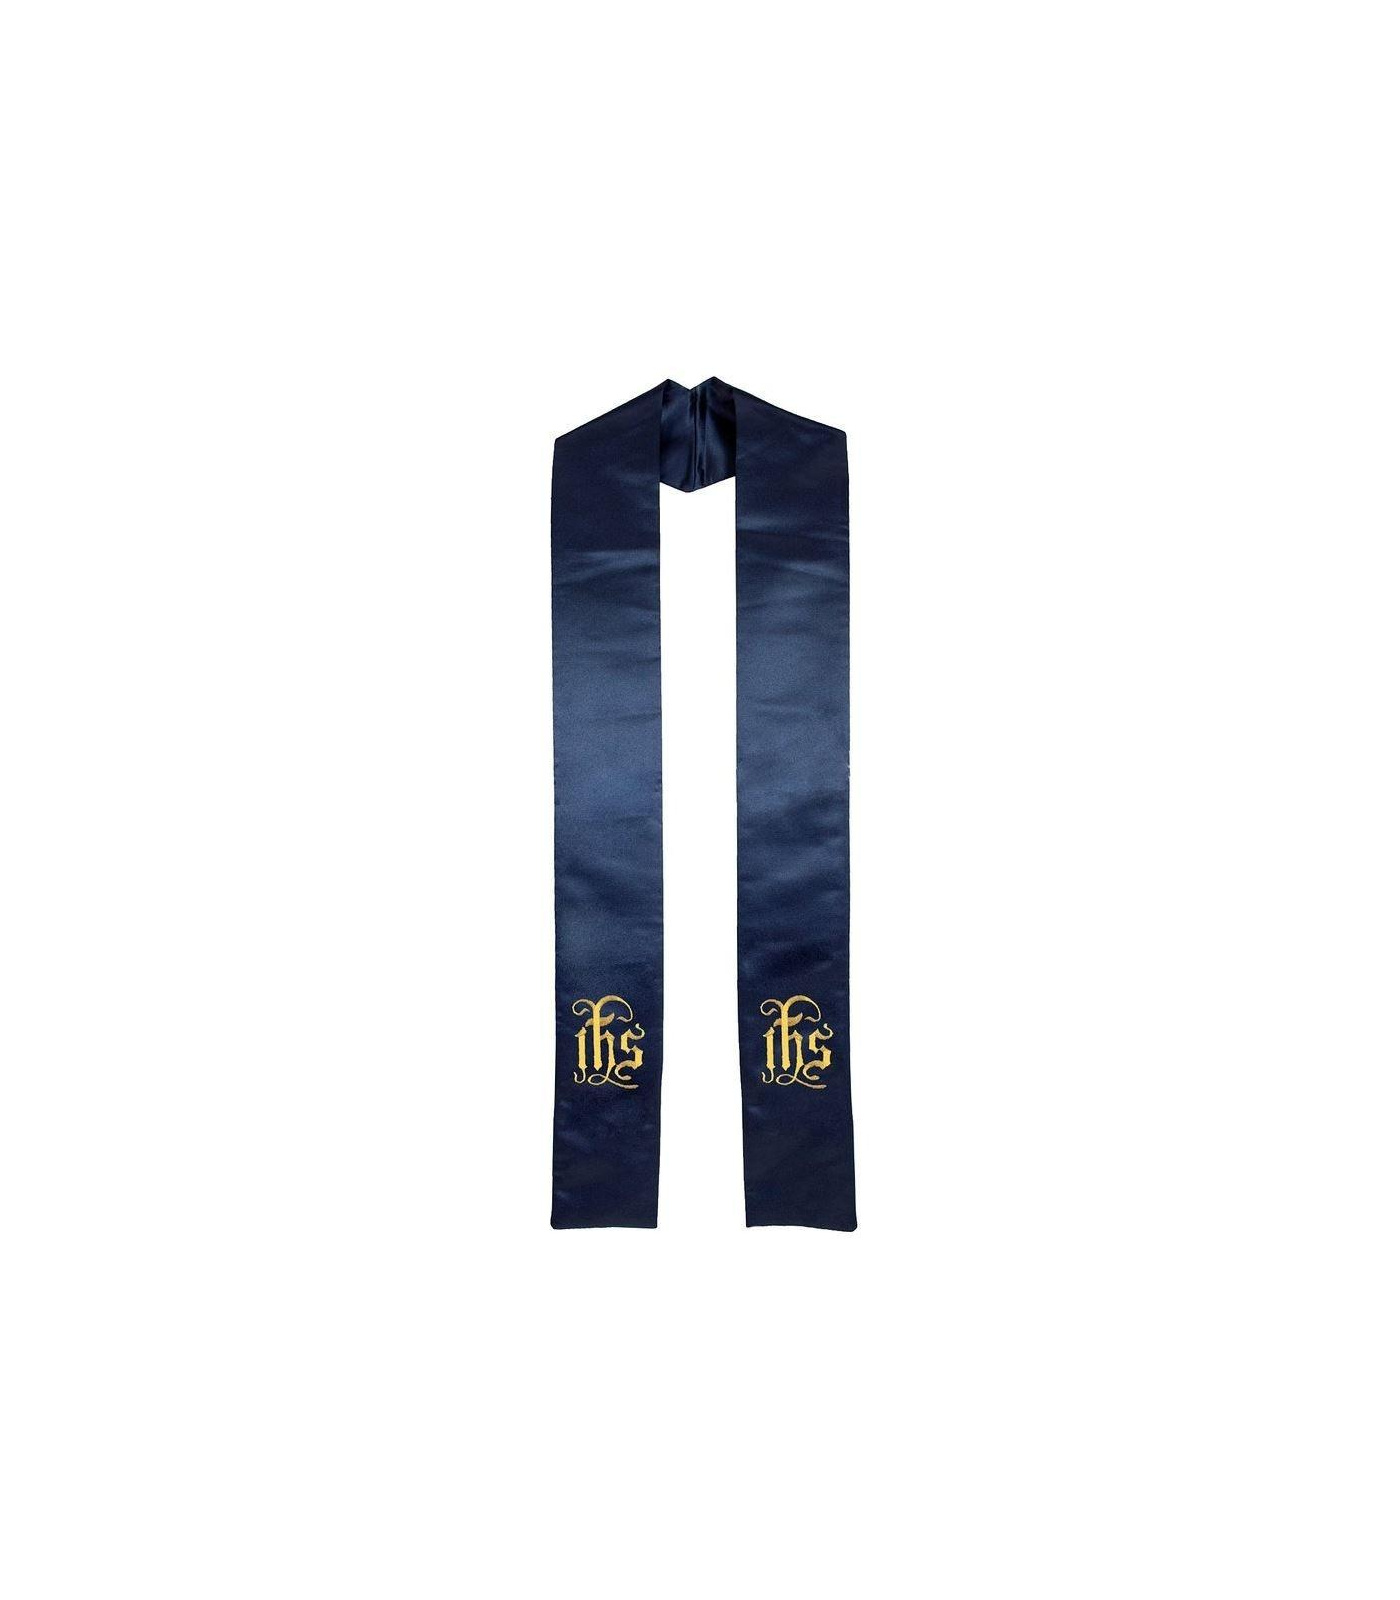 name_of_christ_symbol_-_in_his_service_-_navy_blue_1_1826701498